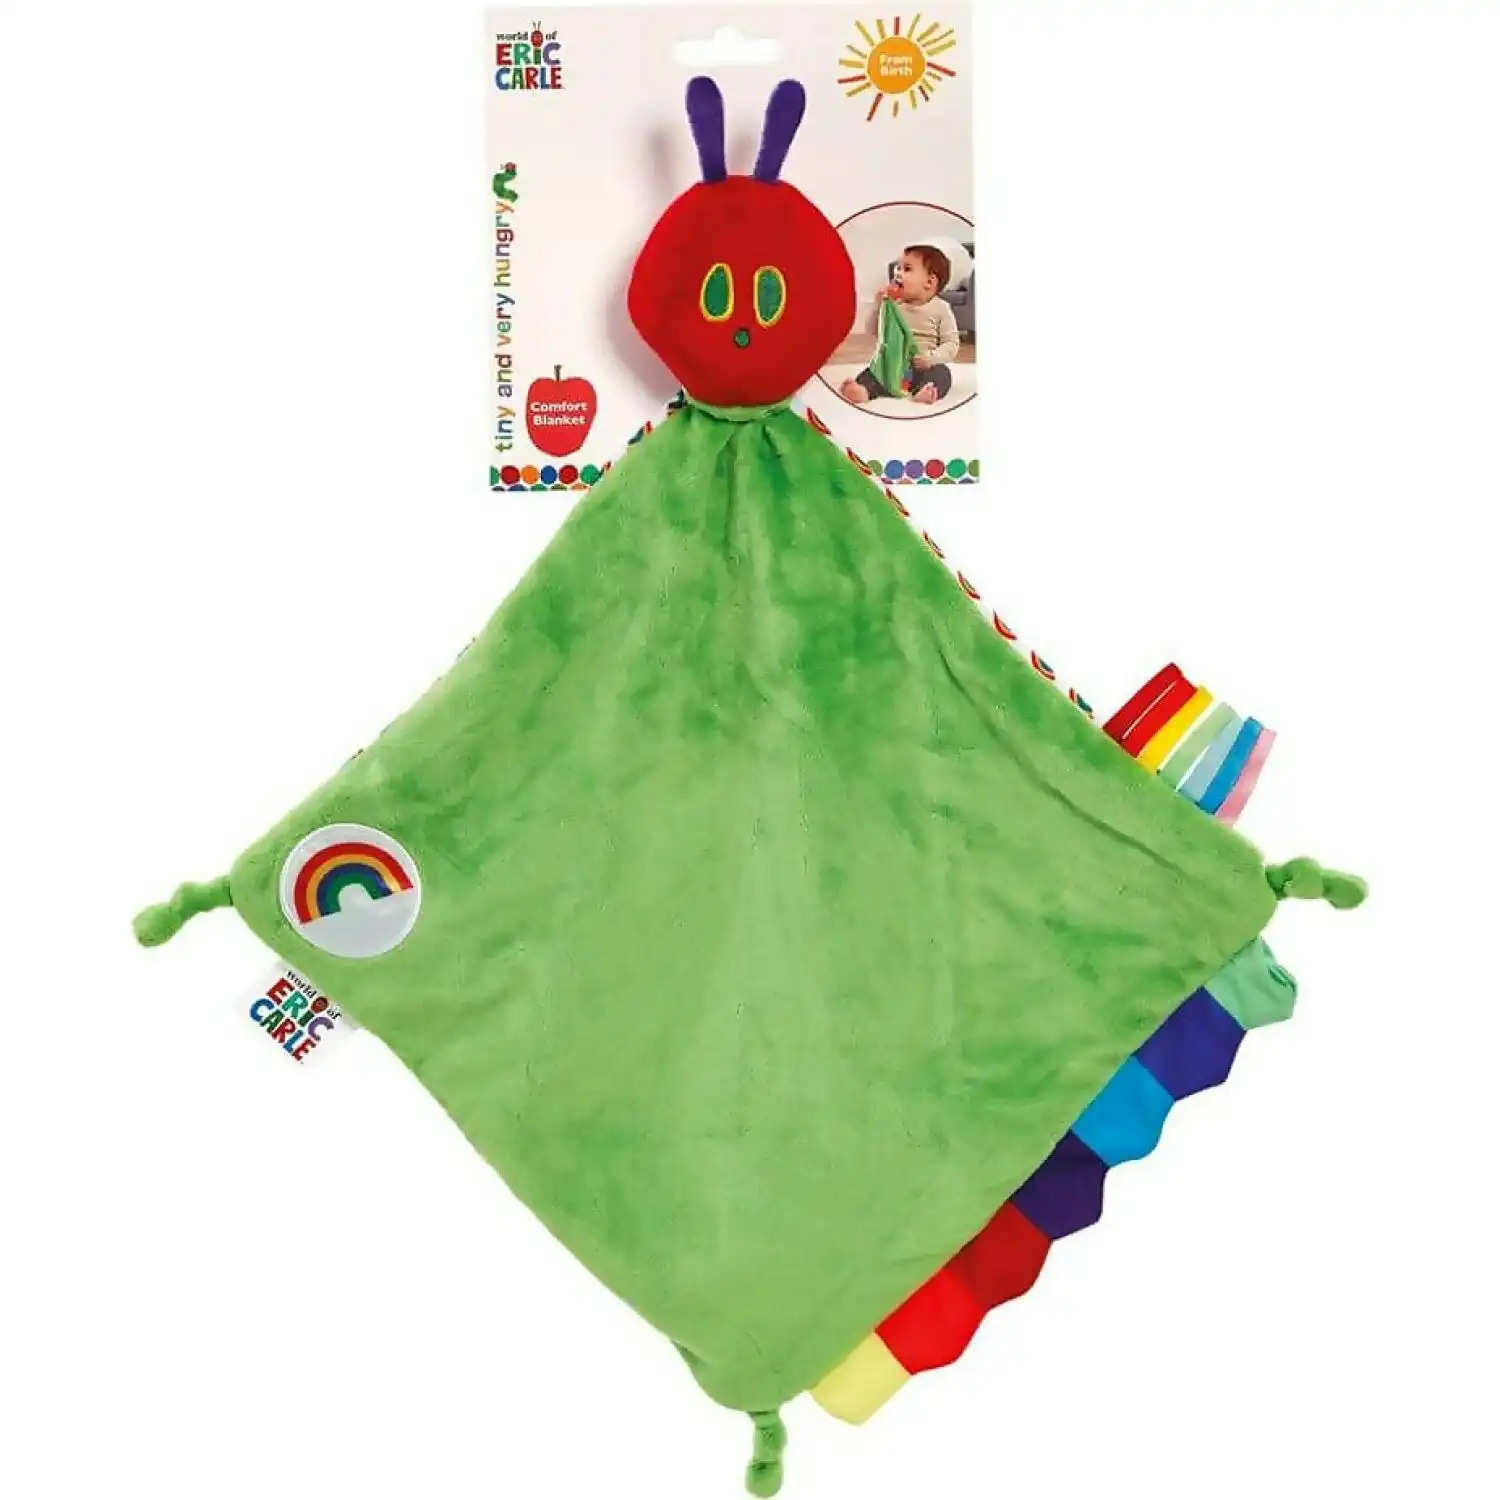 The Very Hungry Caterpillar - Tiny And Very Hungry Caterpillar Comfort Blanket - The World Of Eric Carle